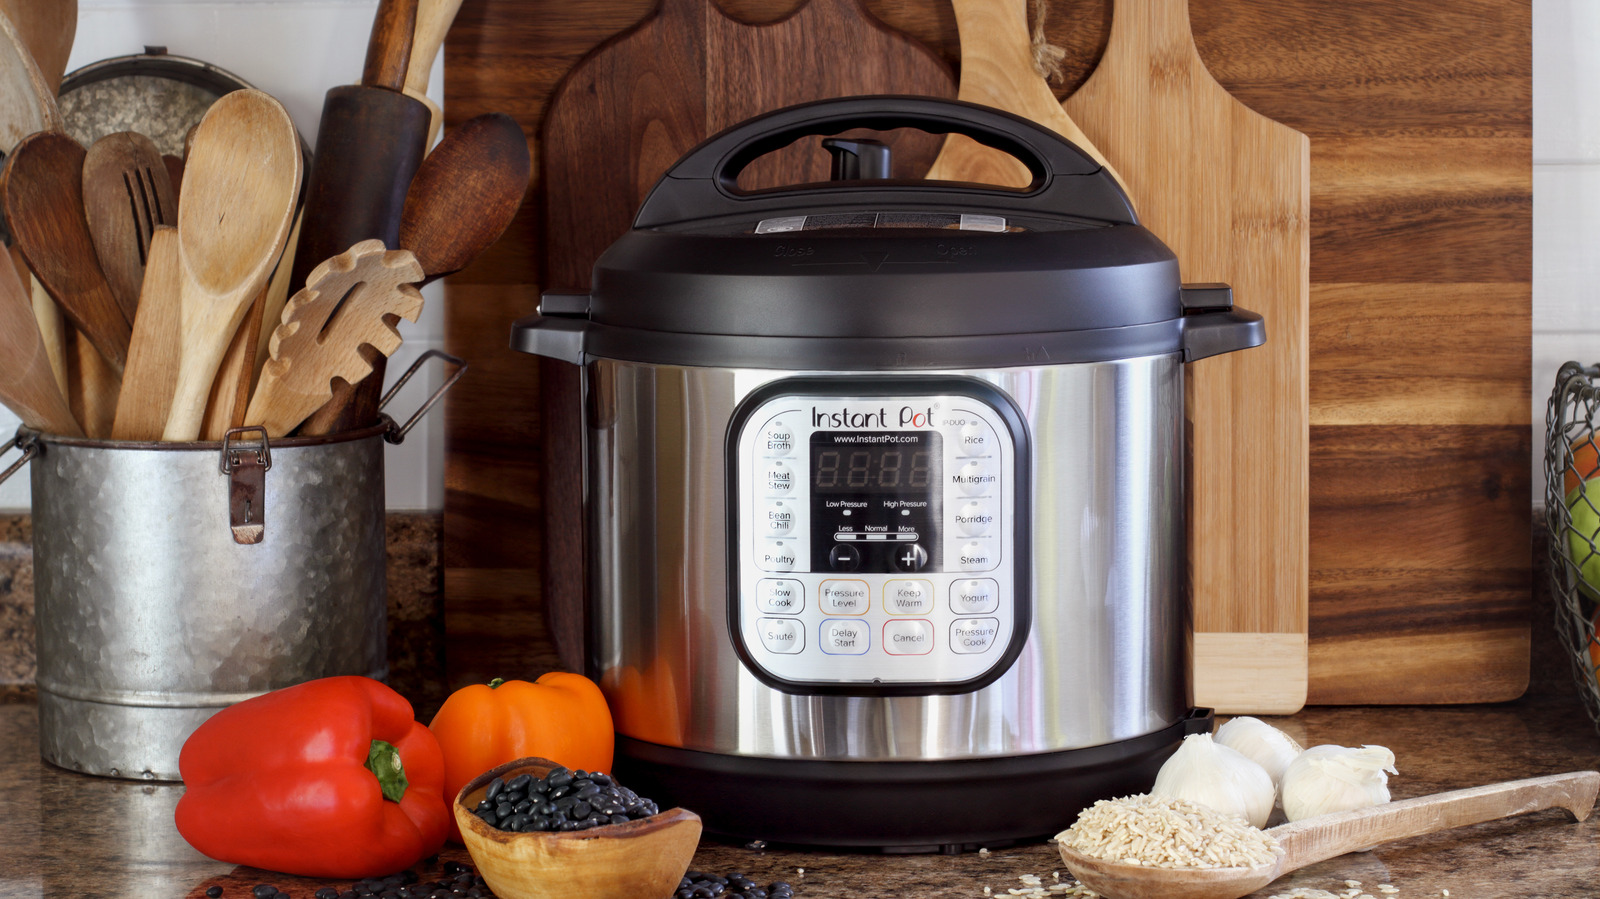 https://www.tastingtable.com/img/gallery/when-you-should-use-the-natural-release-on-your-instant-pot/l-intro-1660936902.jpg